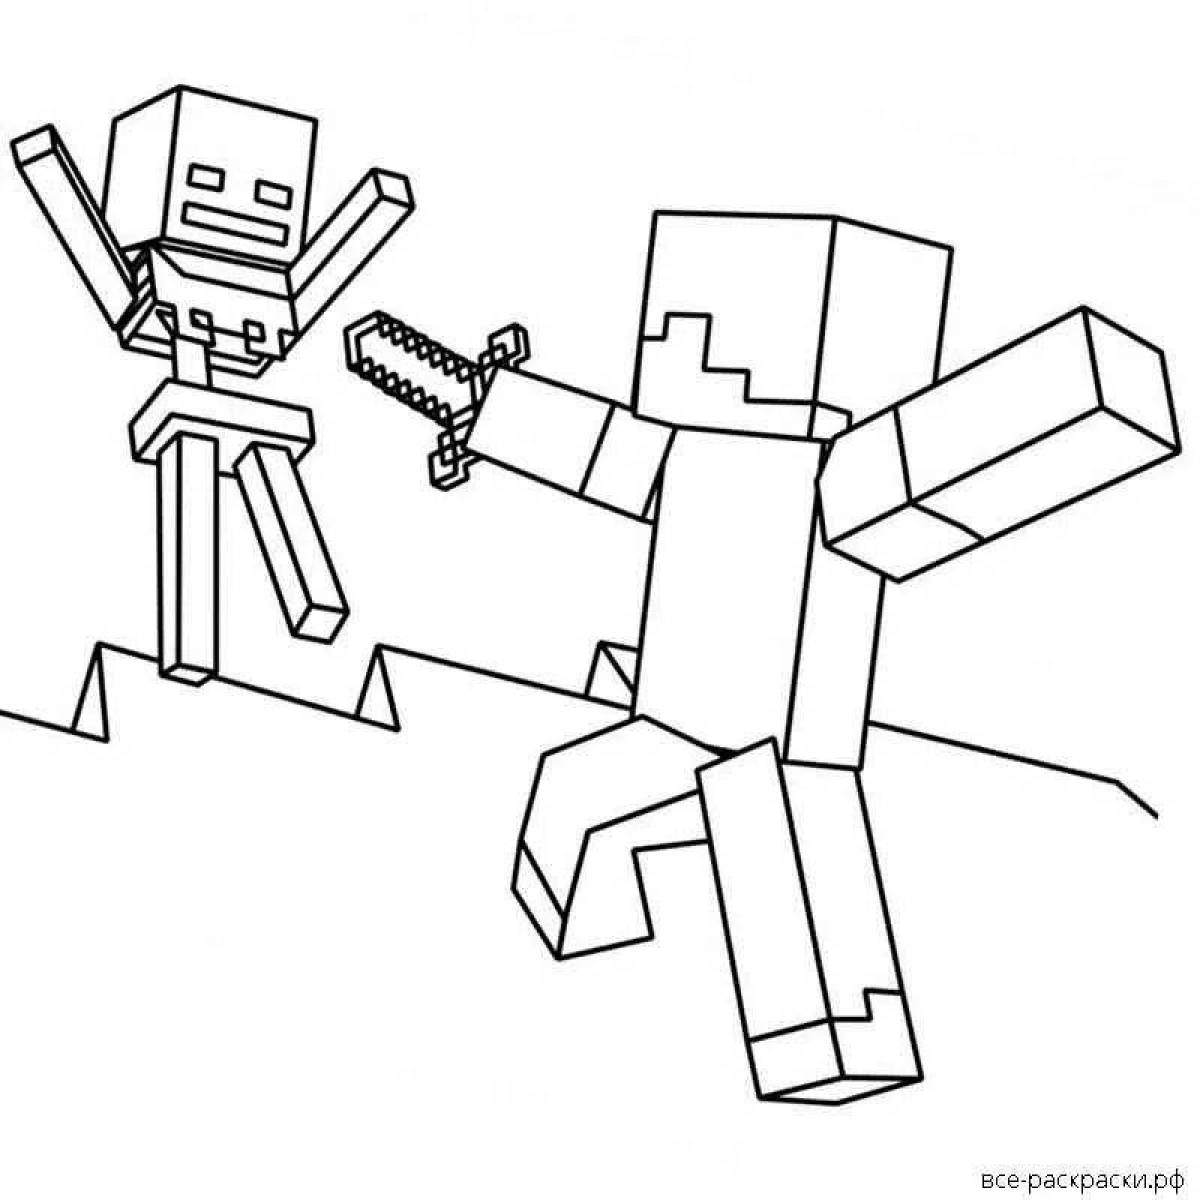 Creative alex and steve minecraft coloring